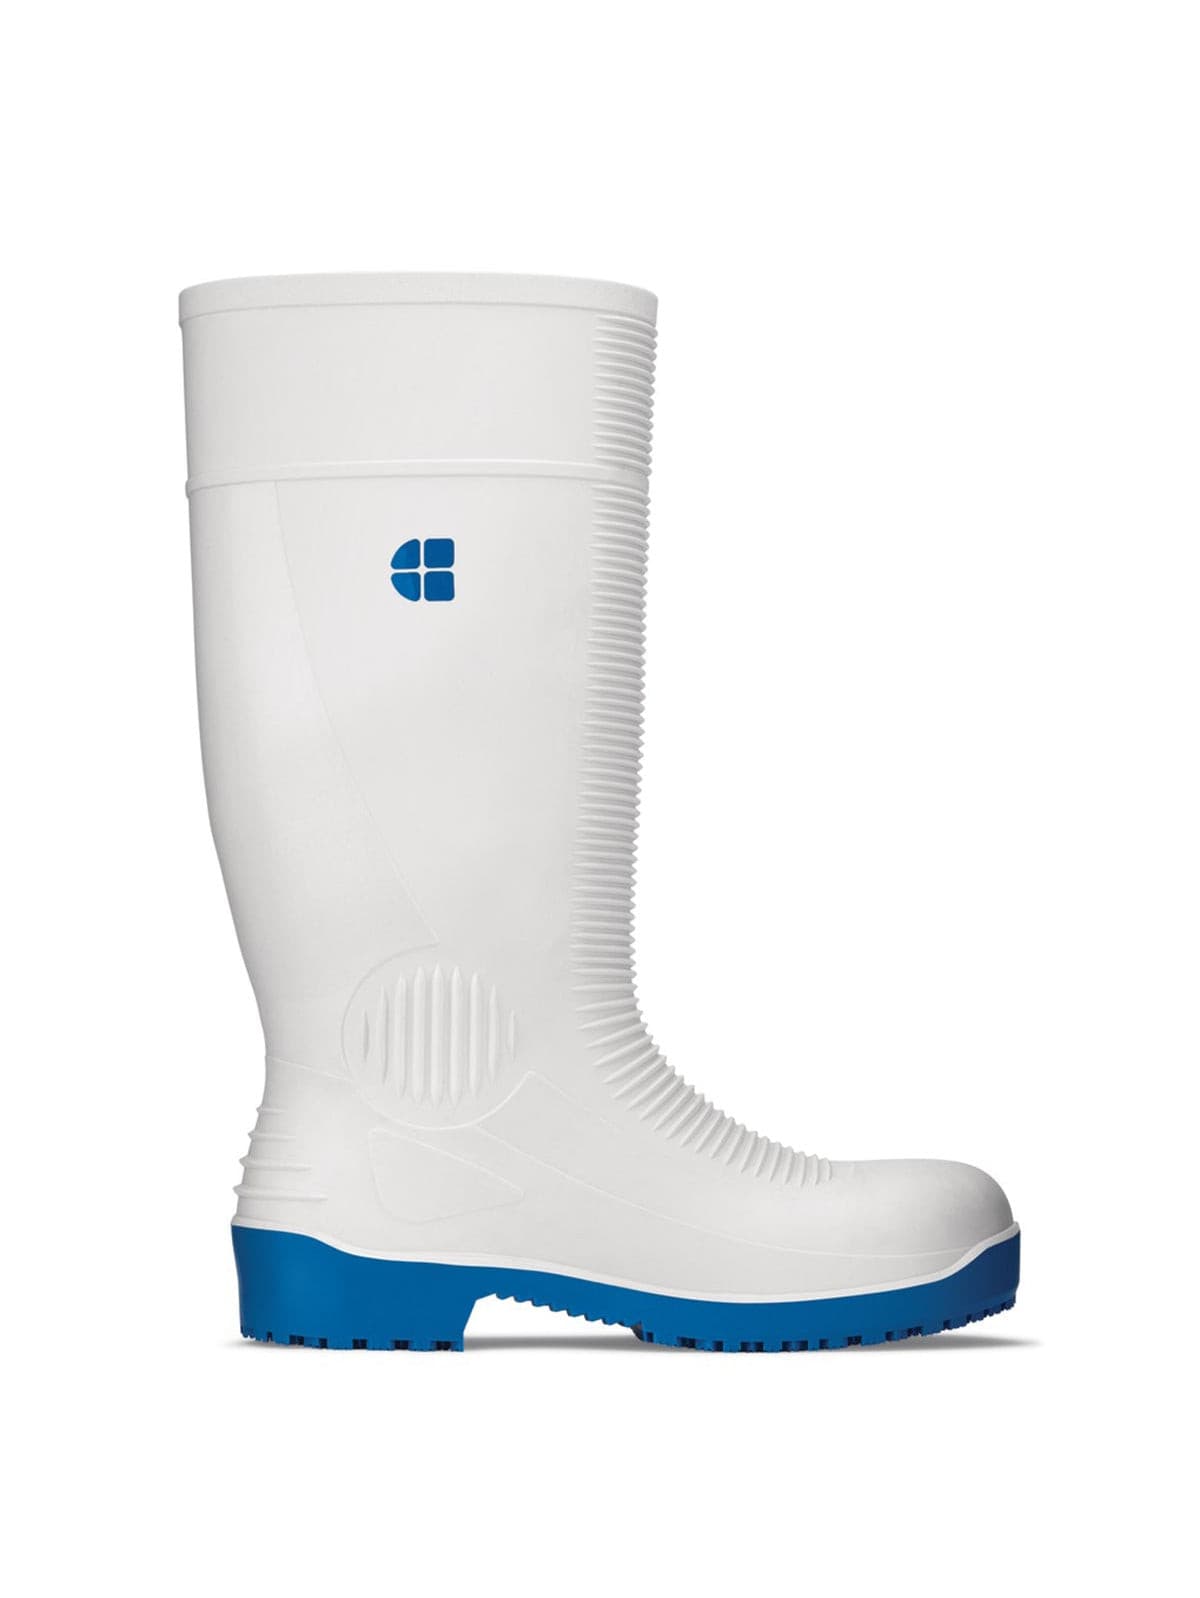 Unisex Safety Boot Bastion White (S4) by Shoes For Crews -  ChefsCotton